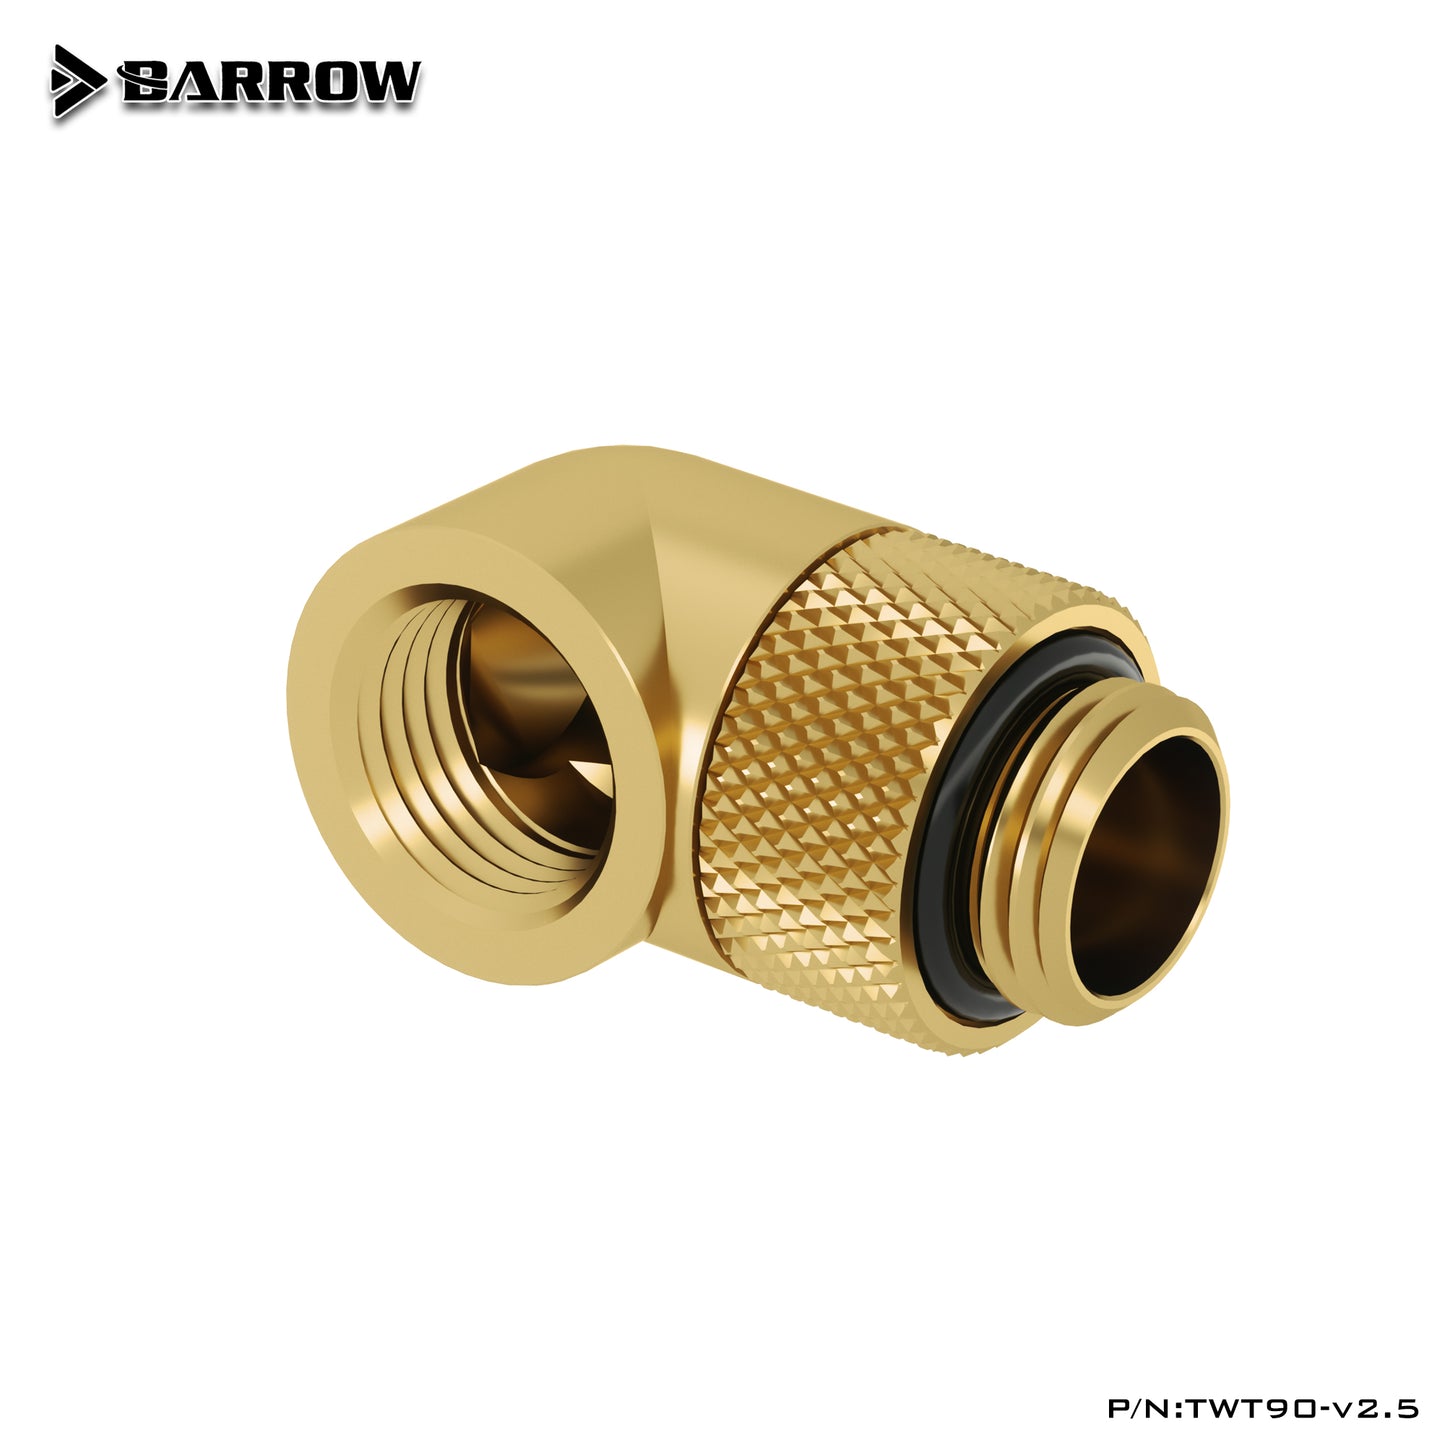 Barrow 90 Degree Rotary Fitting, G1/4'' Thread Adapter, 180° Rotatable Convenient For Tubeway Connection, Common Water Cooling Fitting, TWT90-v2.5